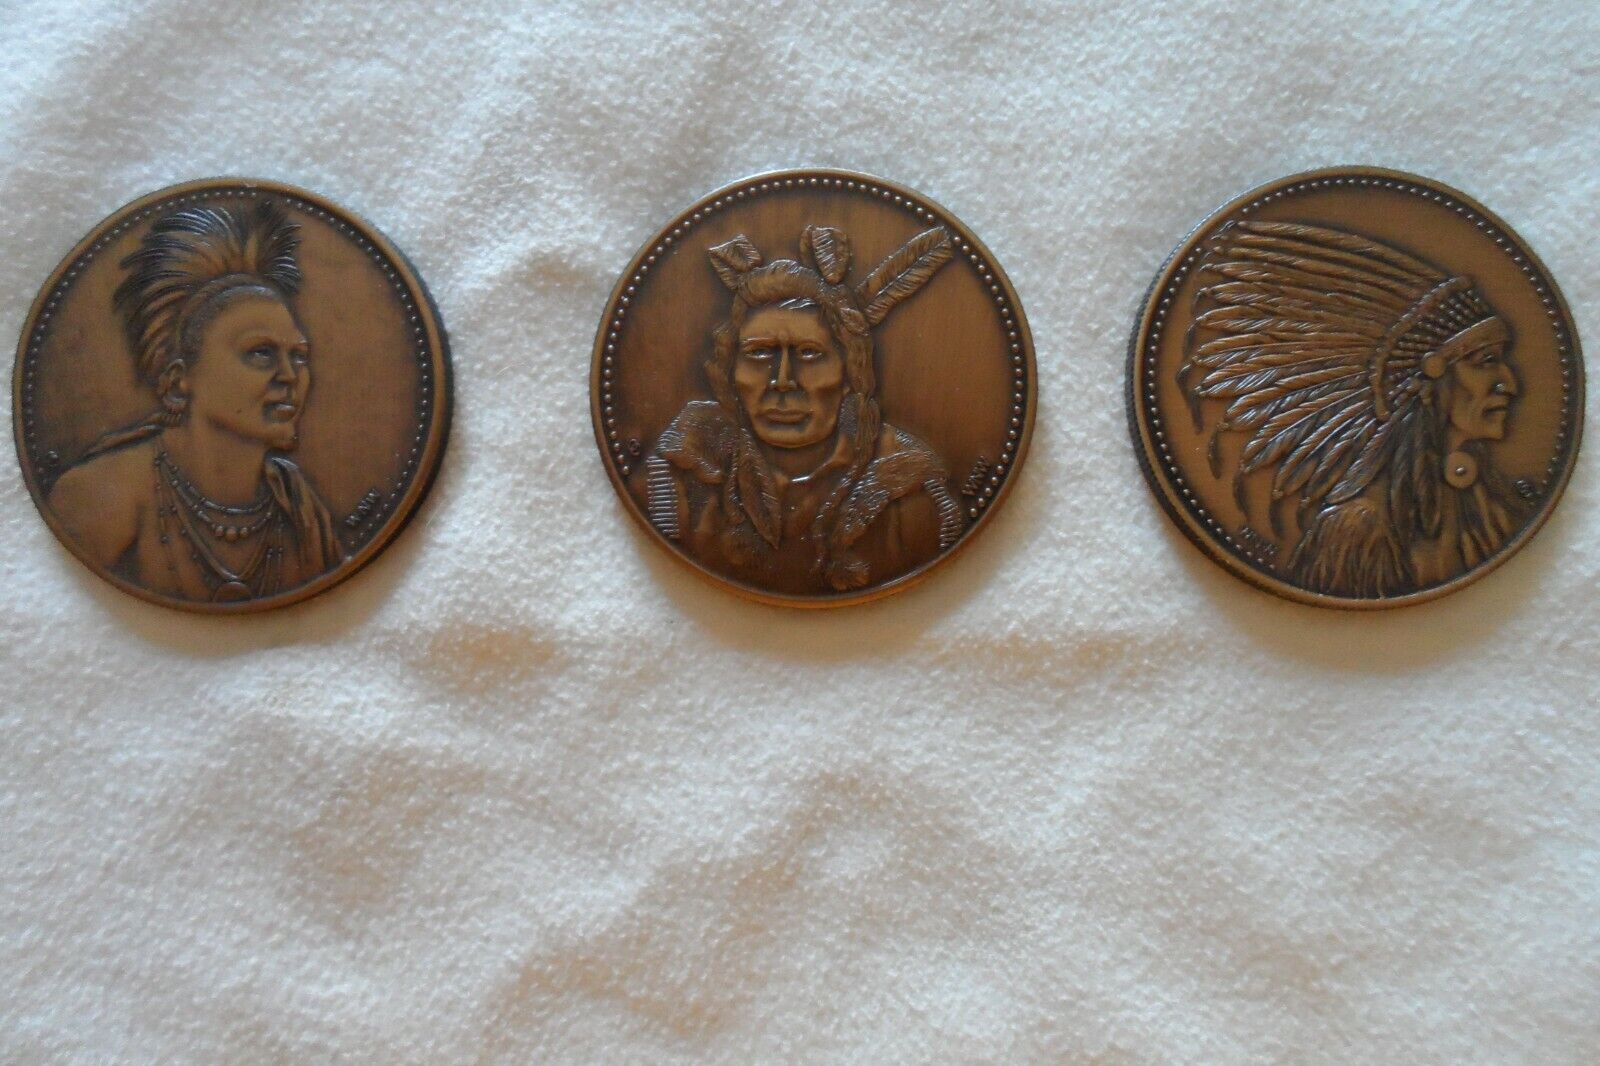 VERY UNIQUE AND GORGEOUS 3 COIN NATIVE AMERICAN SET OSAGE AND SIOUX Без бренда